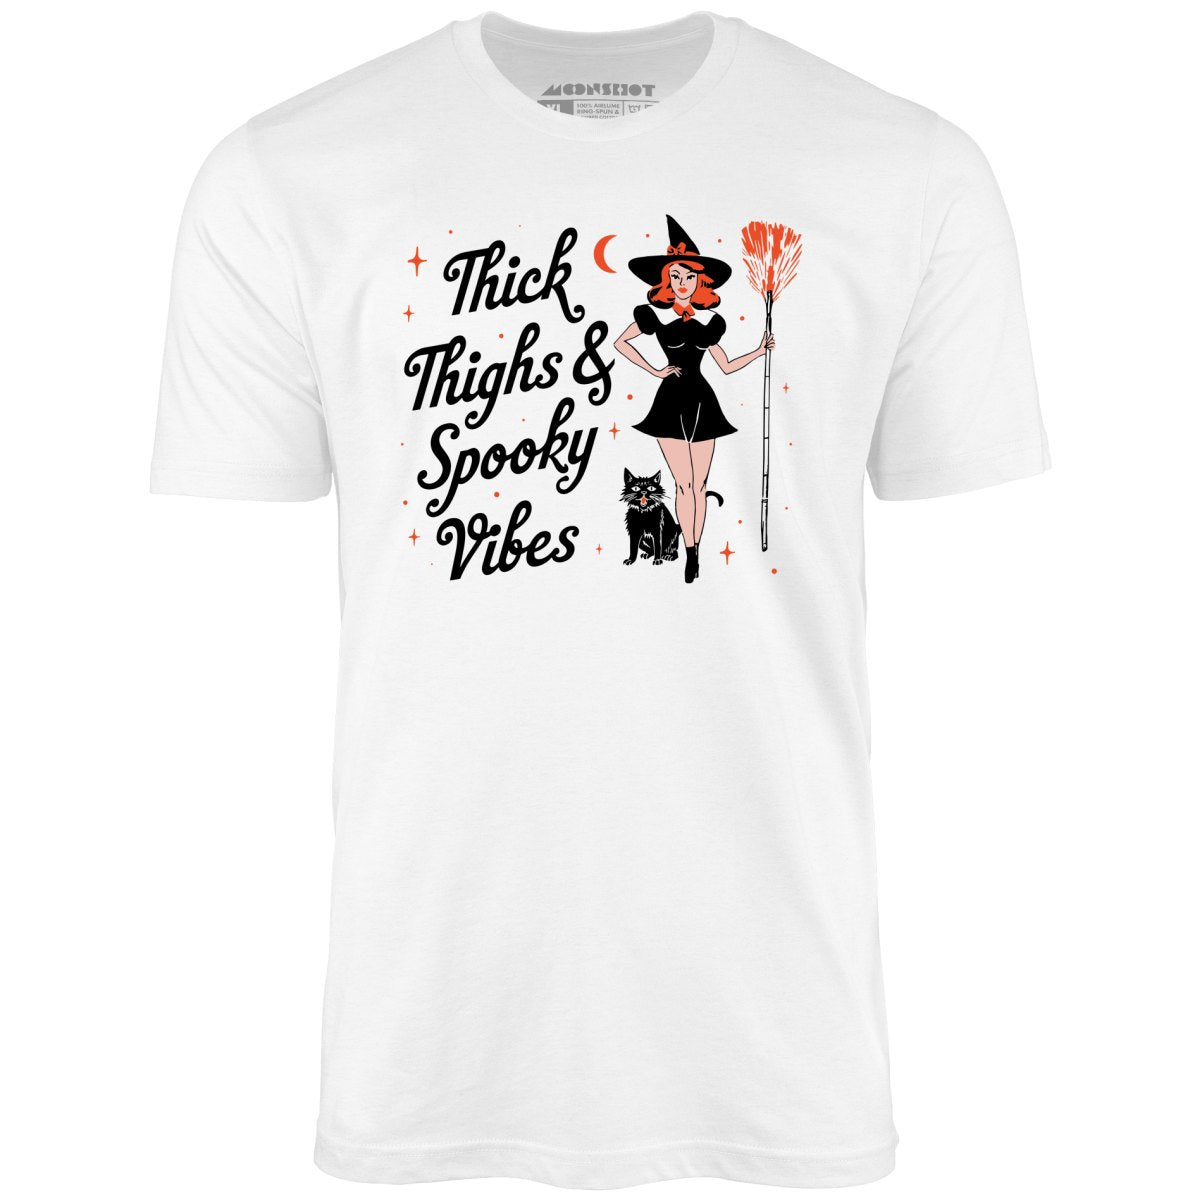 Thick Thighs and Spooky Vibes - Unisex T-Shirt